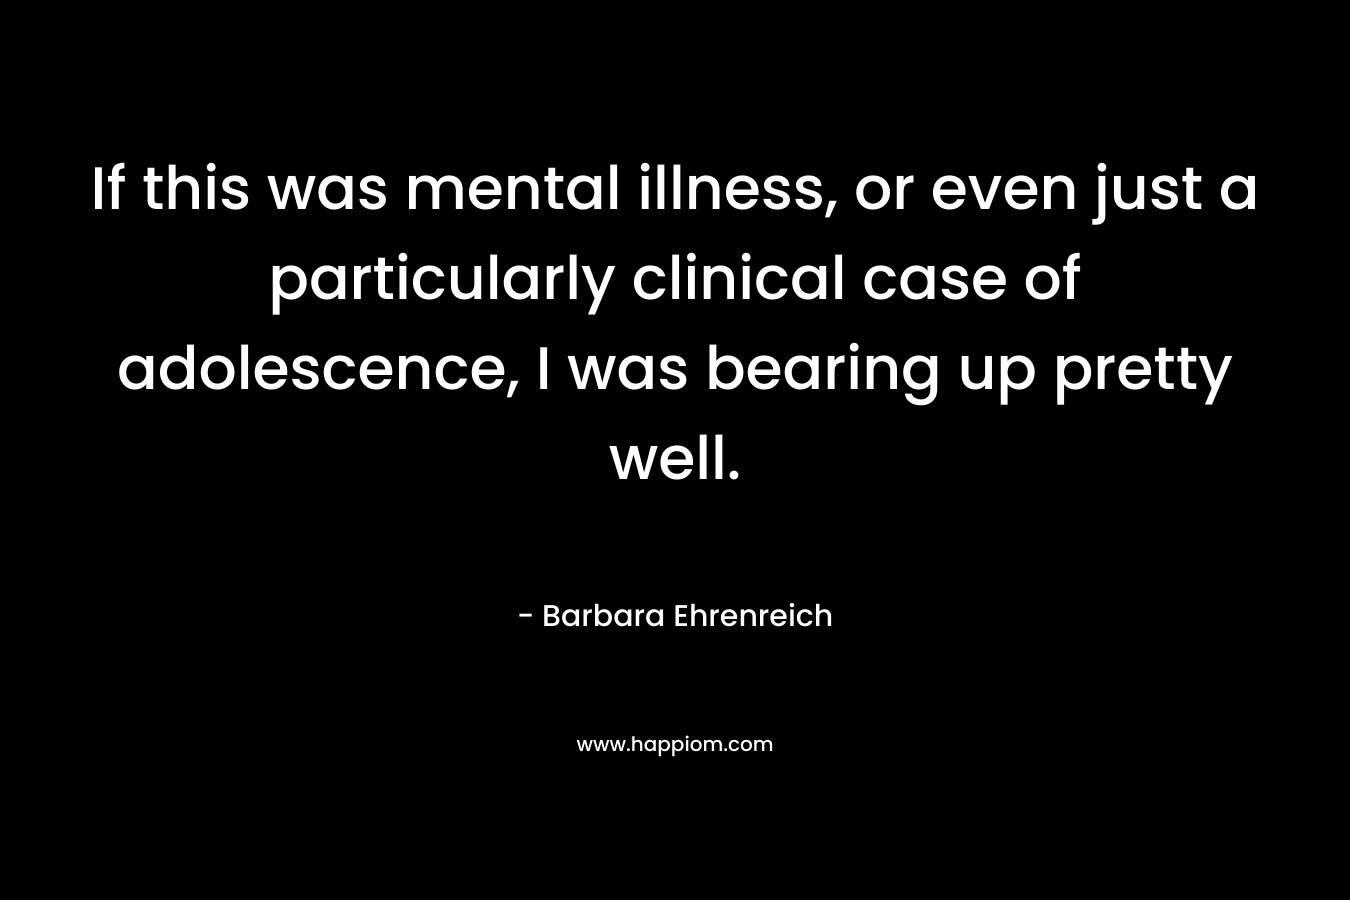 If this was mental illness, or even just a particularly clinical case of adolescence, I was bearing up pretty well. – Barbara Ehrenreich